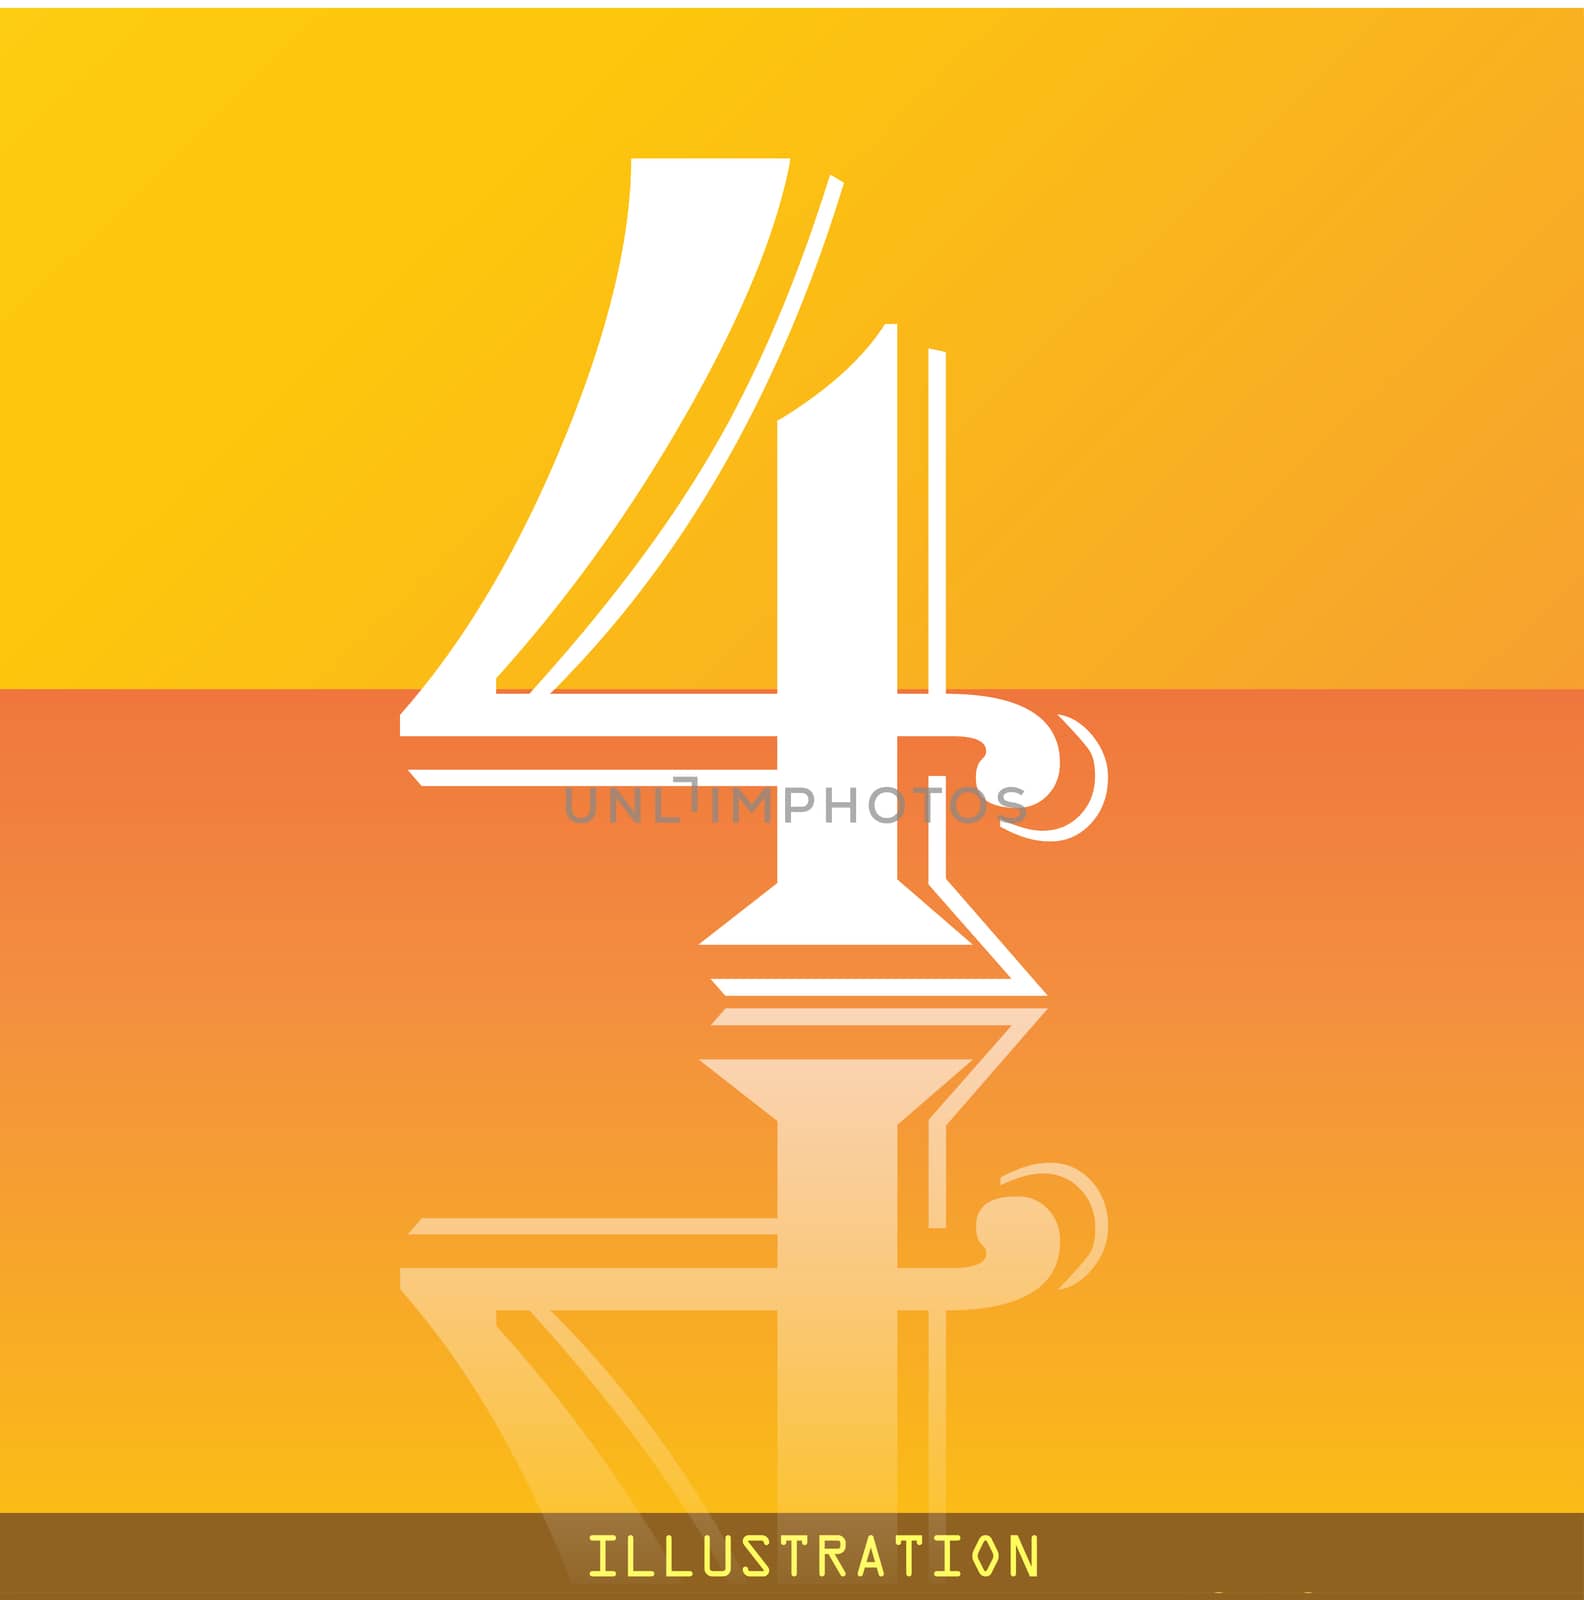 number four icon symbol Flat modern web design with reflection and space for your text. illustration. Raster version